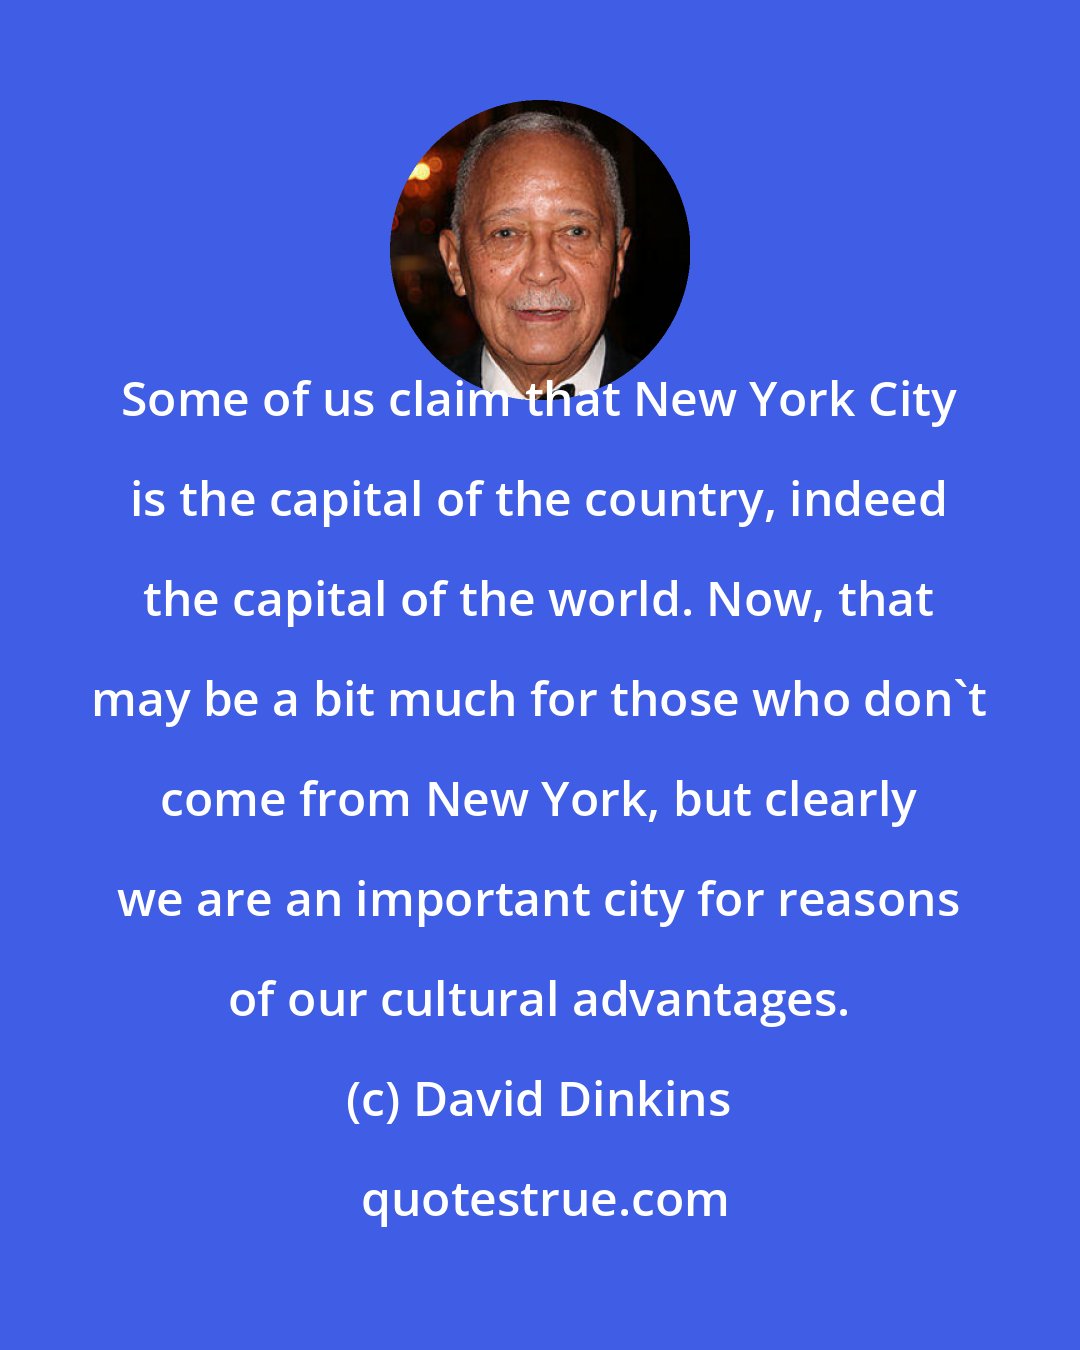 David Dinkins: Some of us claim that New York City is the capital of the country, indeed the capital of the world. Now, that may be a bit much for those who don't come from New York, but clearly we are an important city for reasons of our cultural advantages.